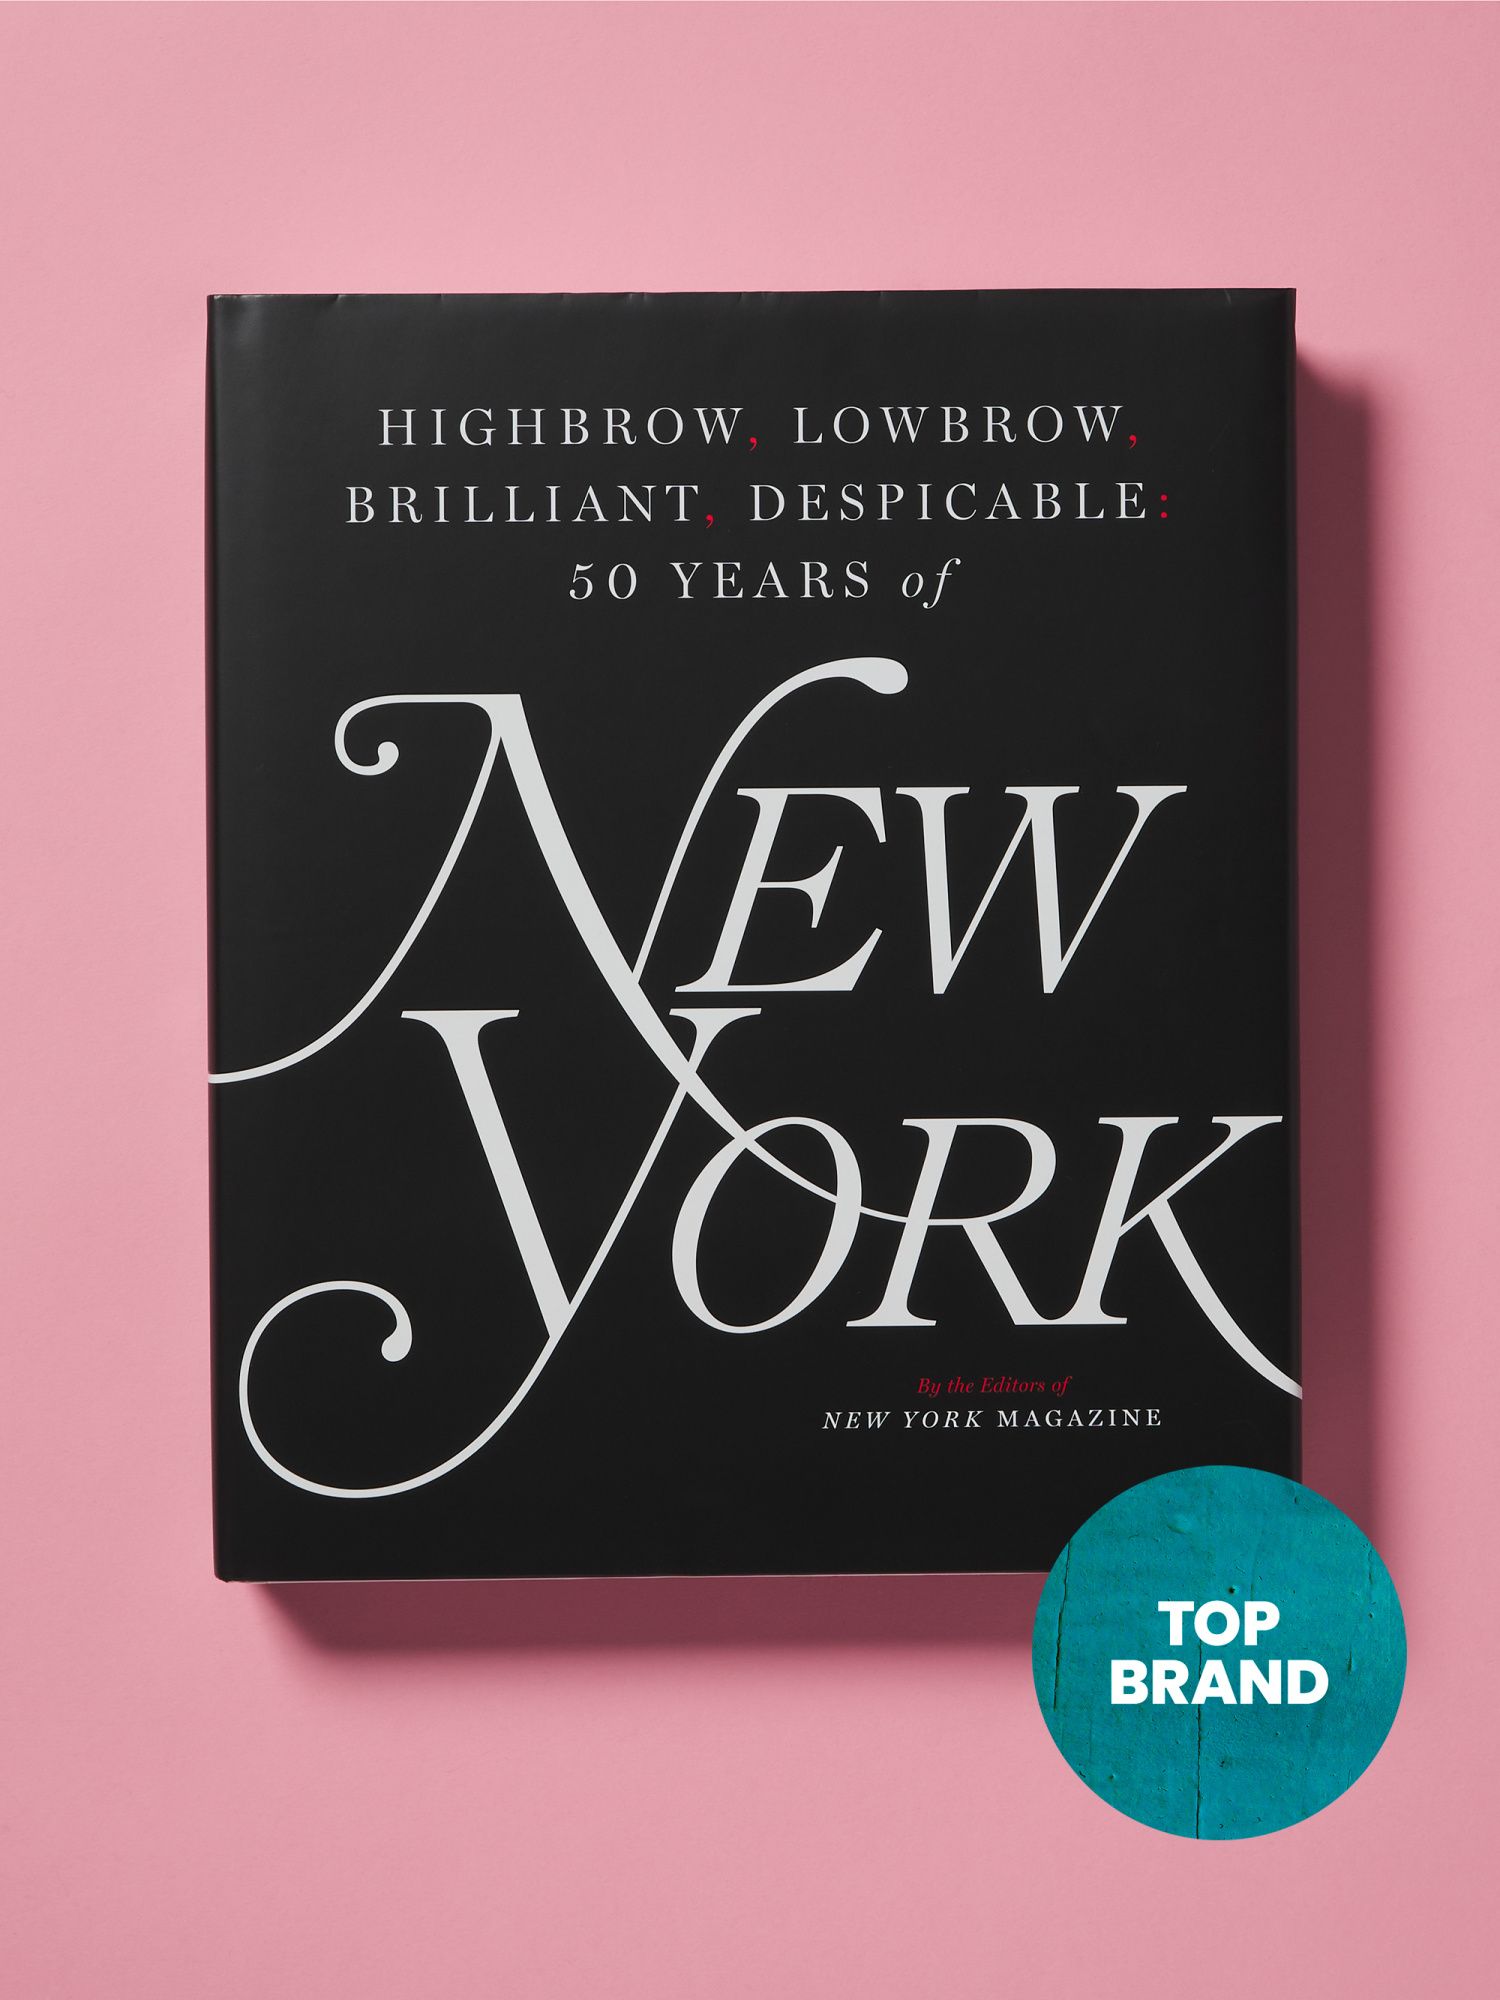 Highbrow Lowbrow Brilliant Despicable Coffee Table Book | Decorative Accents | HomeGoods | HomeGoods